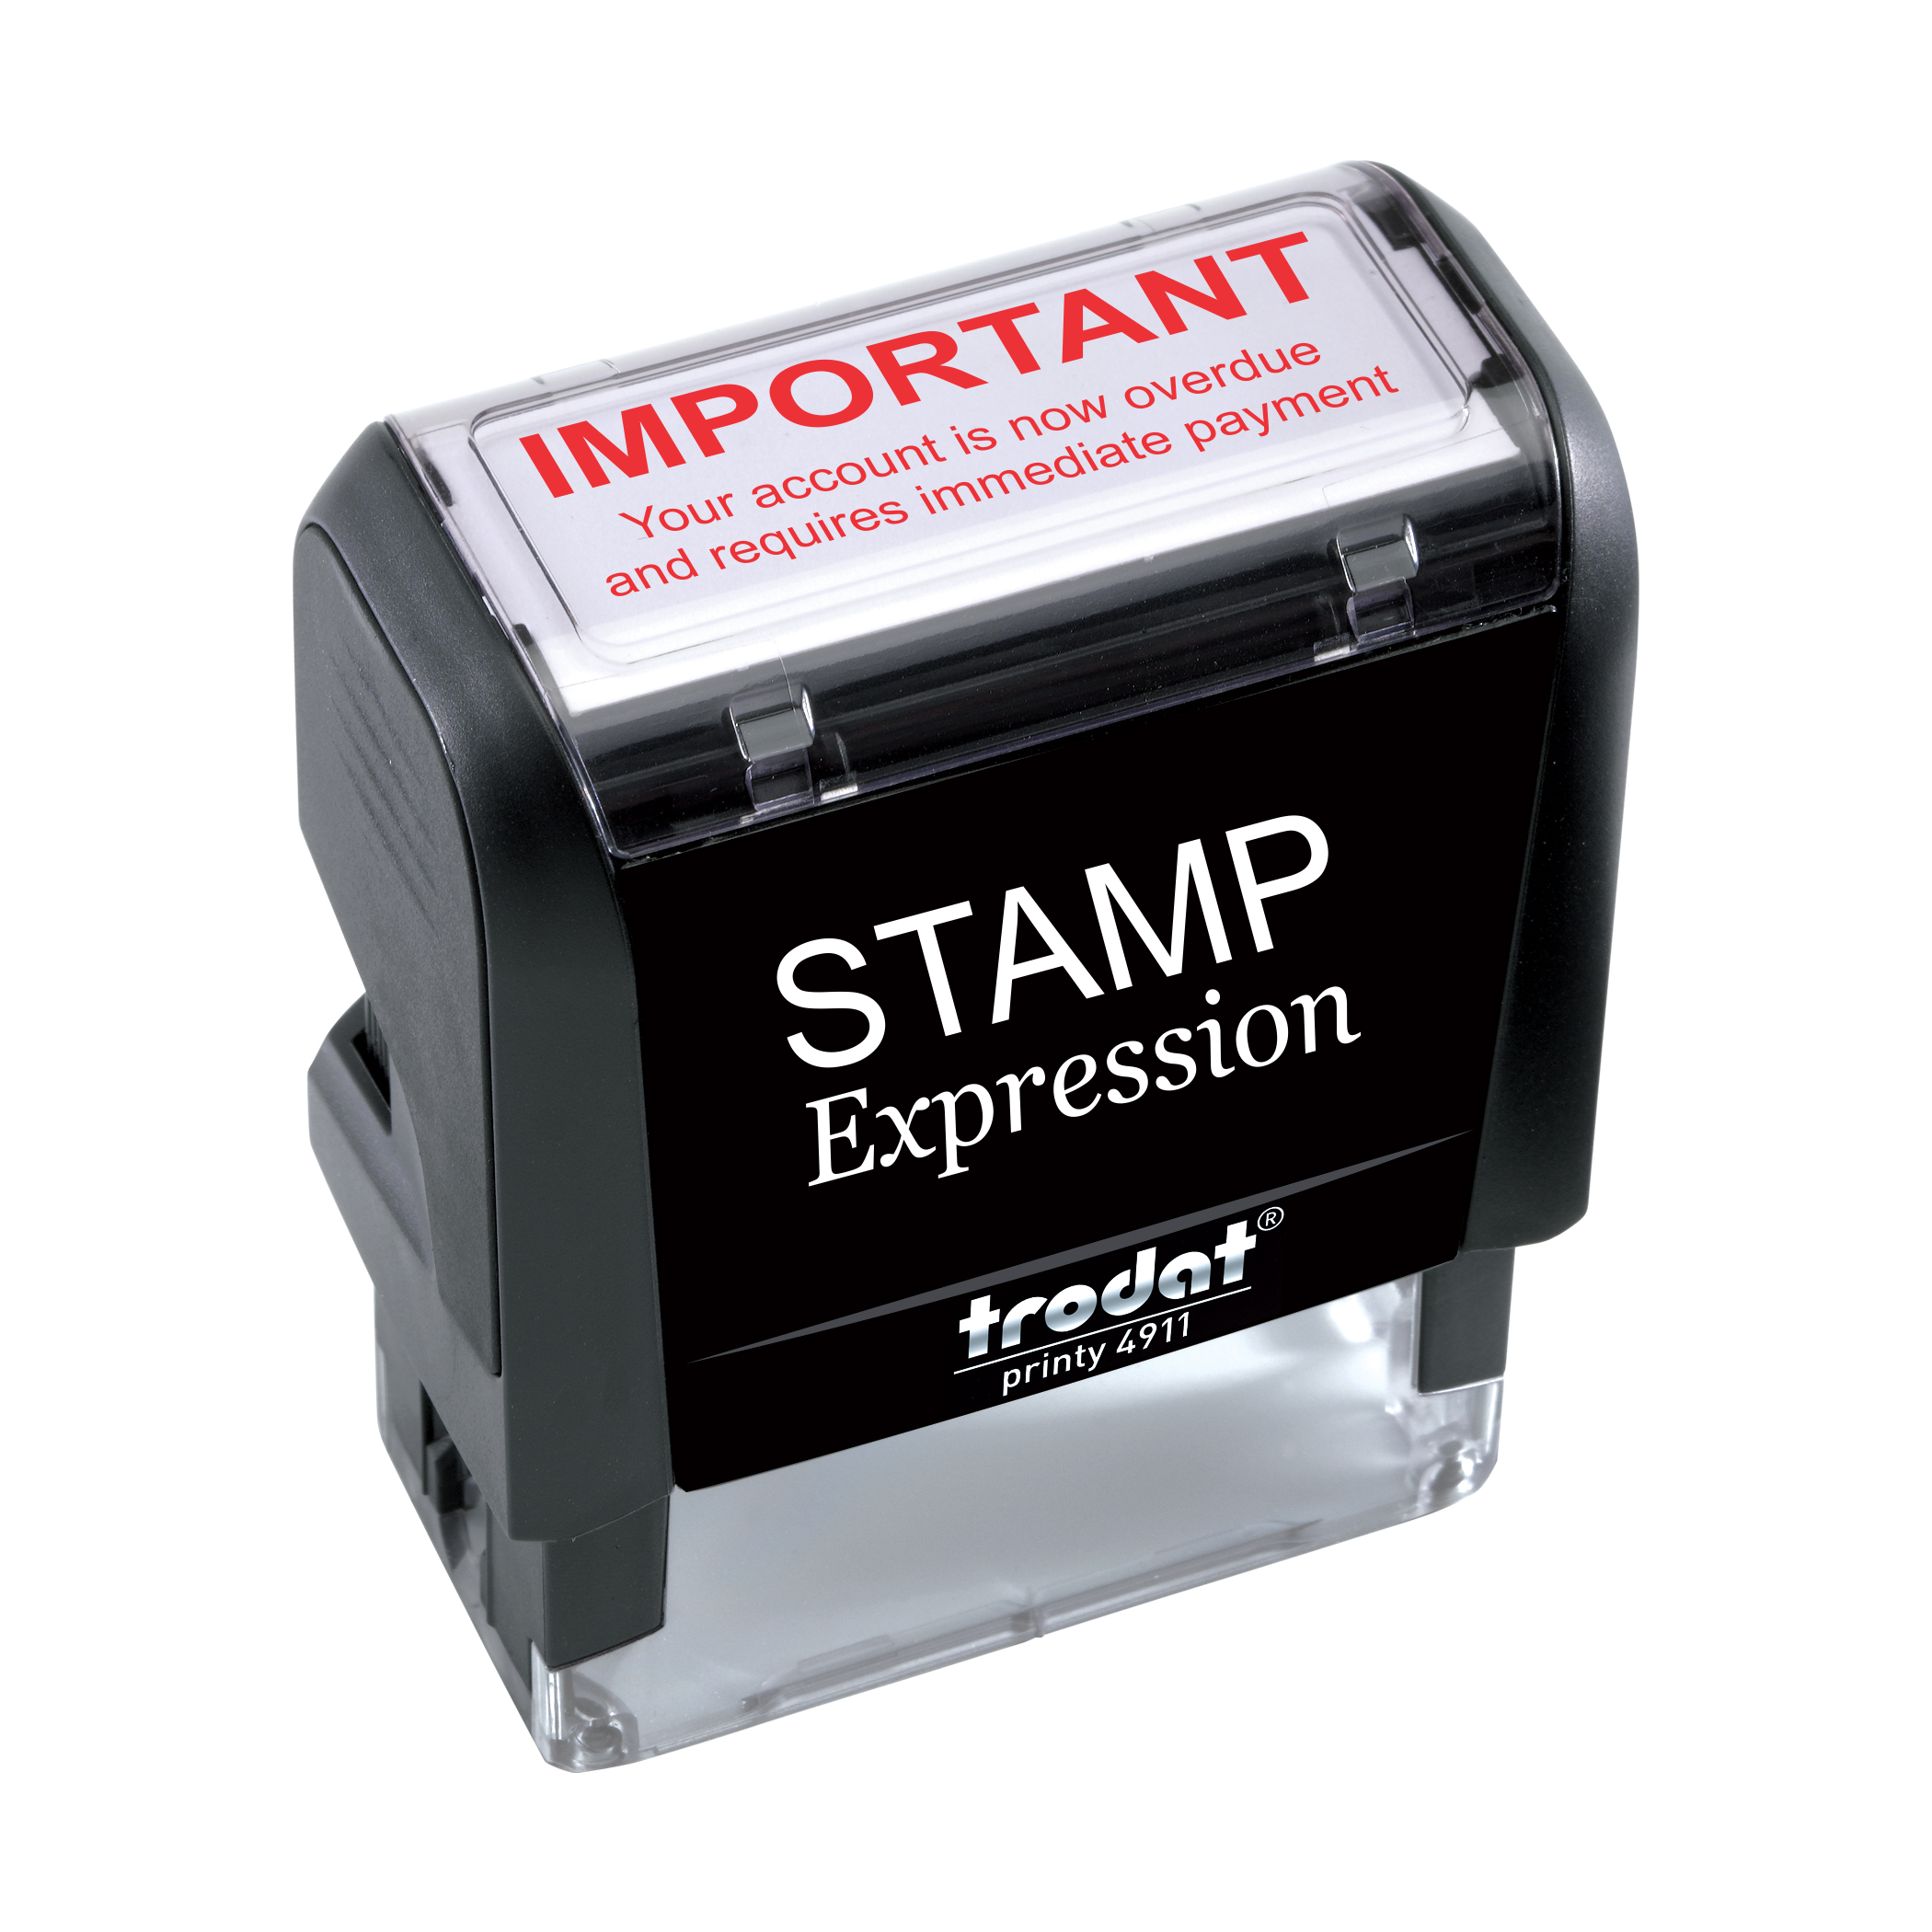 Important! Your Account is Now Overdue and Requires Immediate Attention Office Self Inking Rubber Past Due Stamp